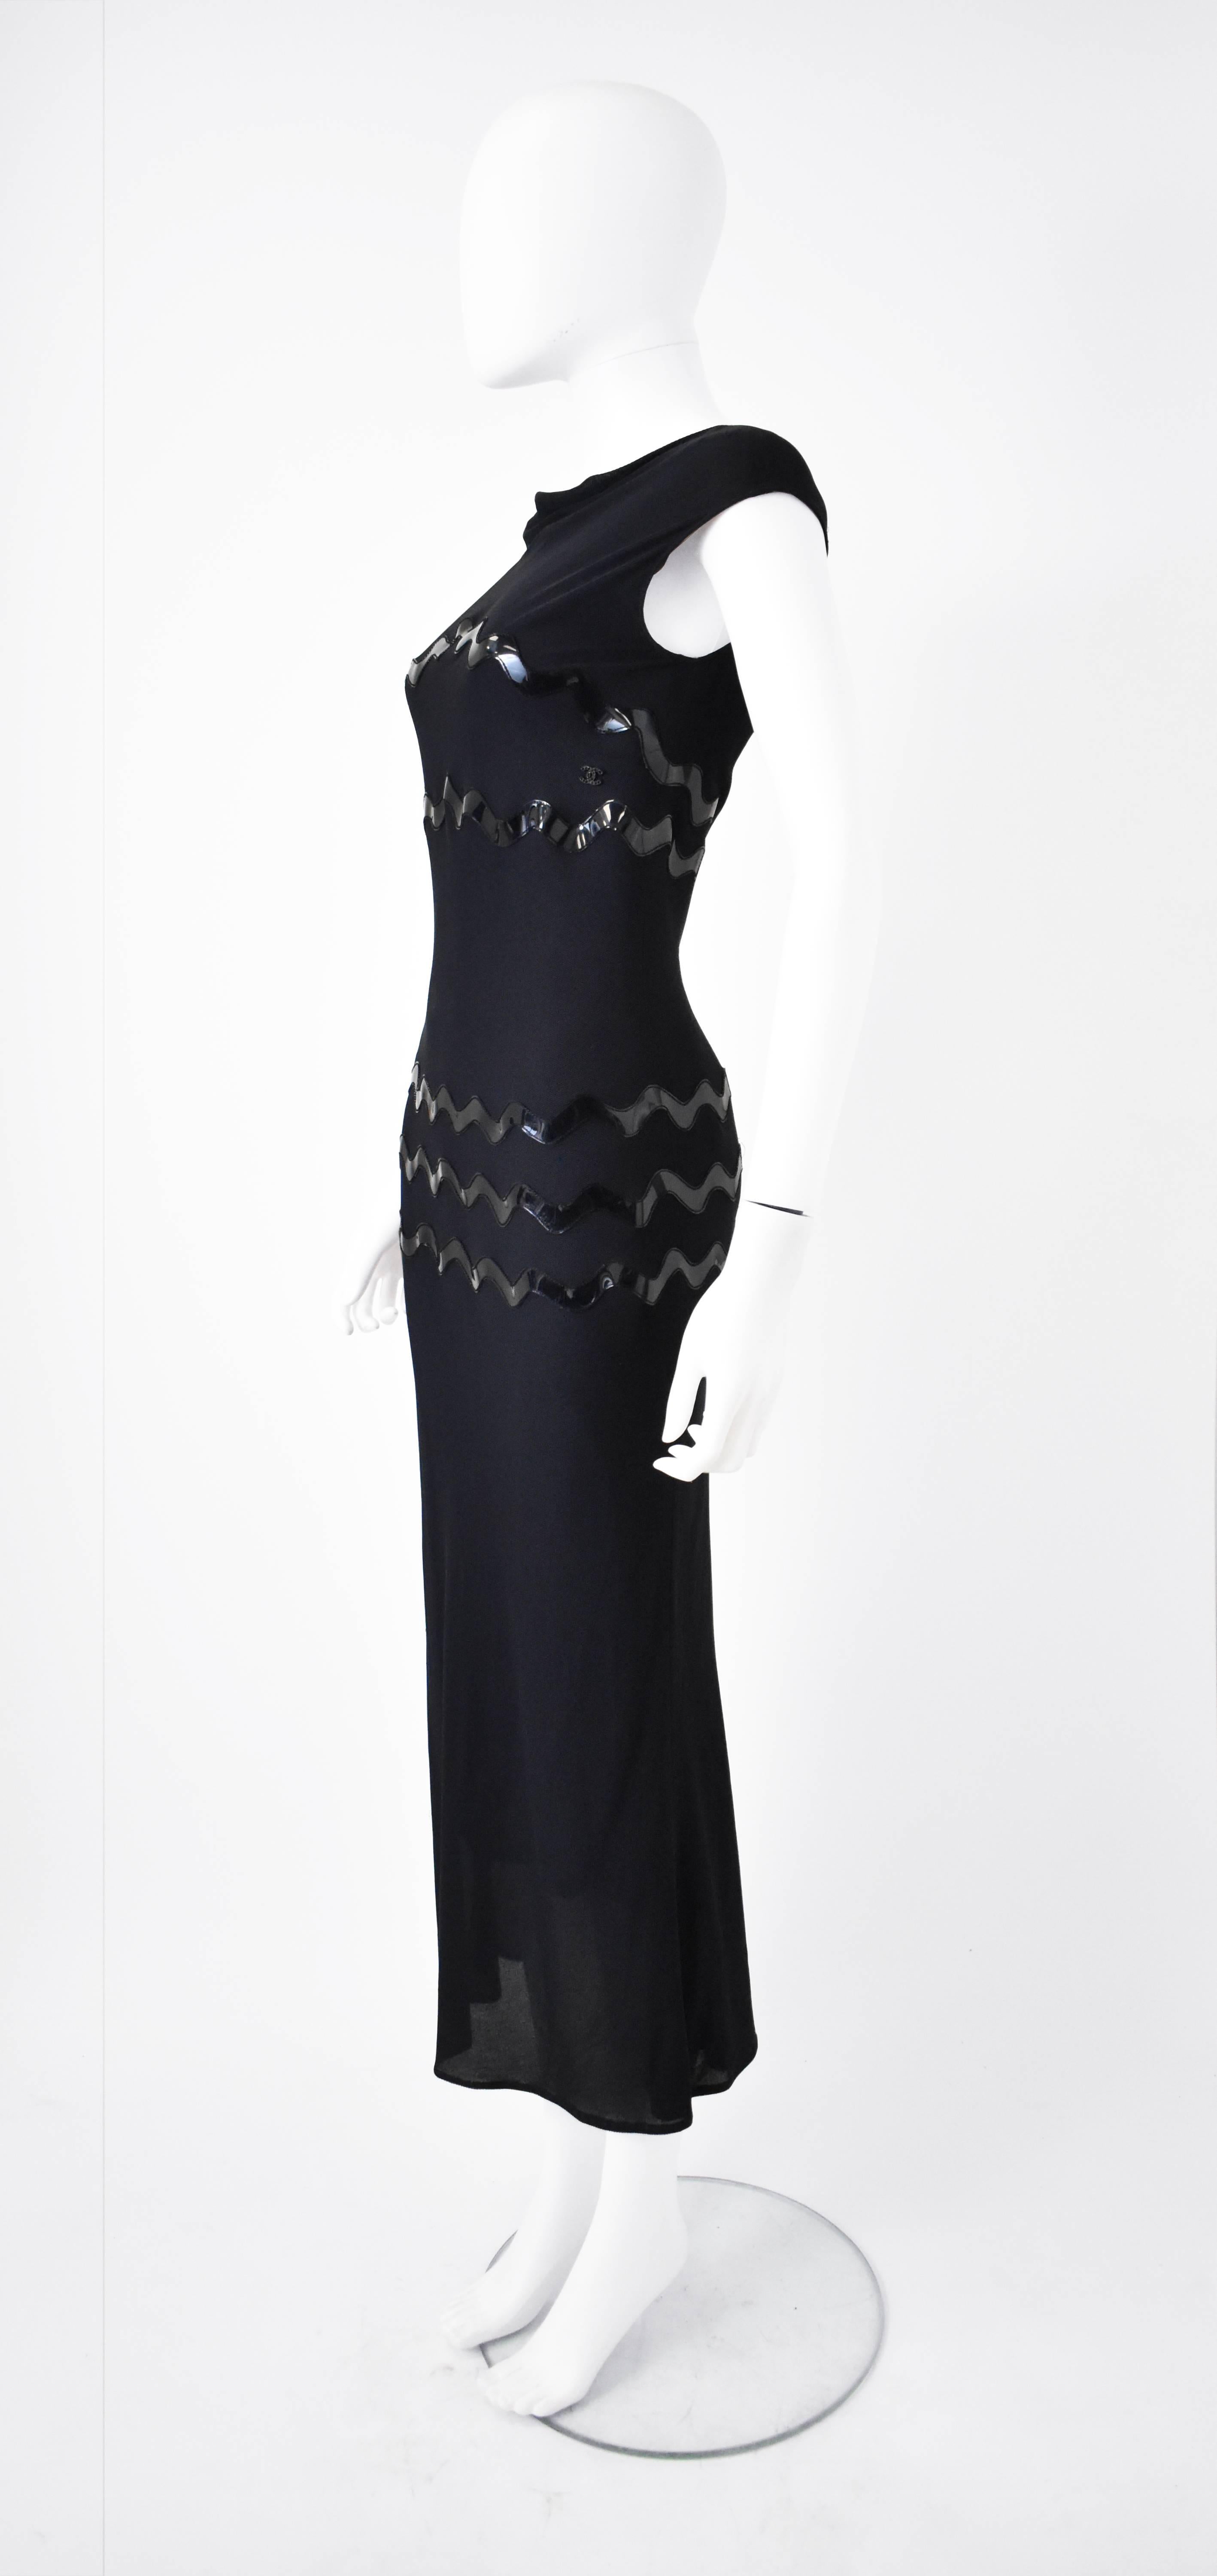 A 1990’s sporty/classic evening dress from Chanel. The dress is made from a dark navy mesh over a layer of dark silk creating a luxurious but sporty look that reflects the popular trends of the 90’s. It also features plastic applique squiggles on